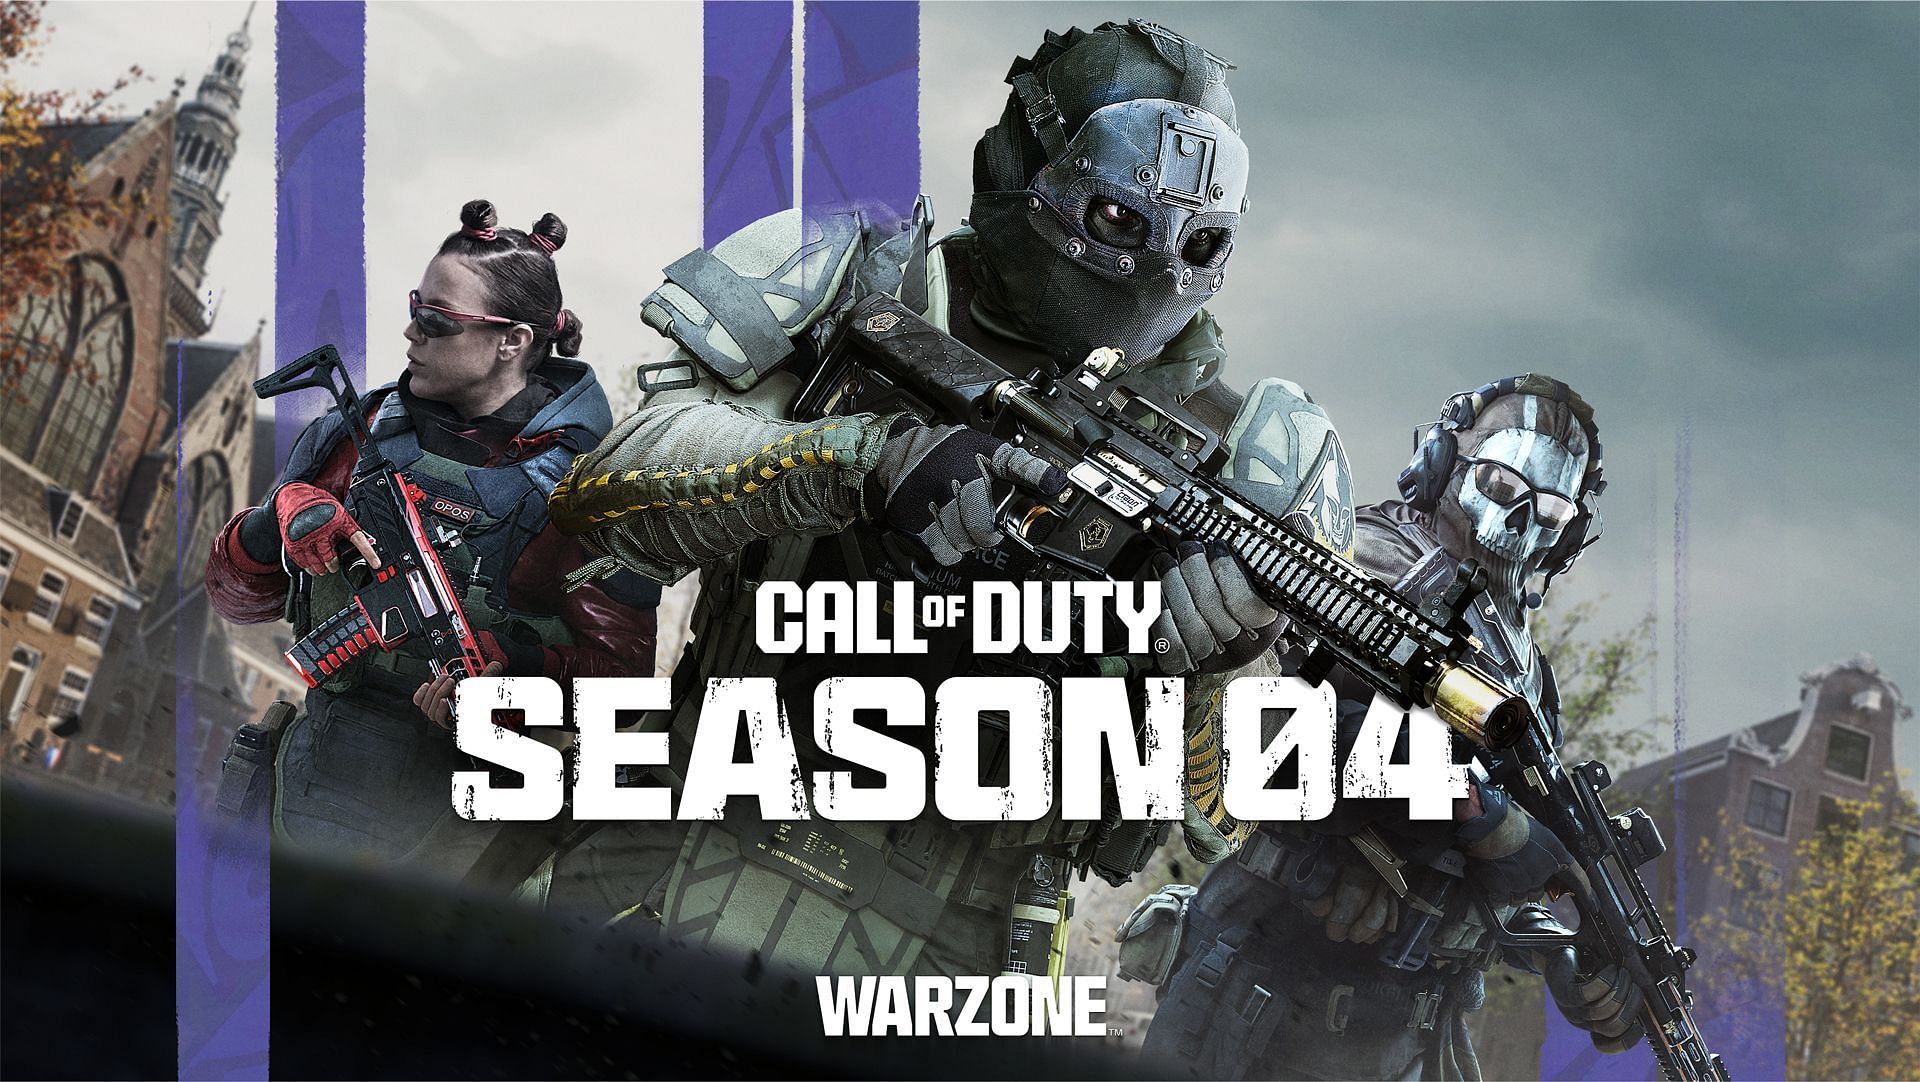 Call of Duty Warzone Season 4 early patch notes New map Vondel, LTM